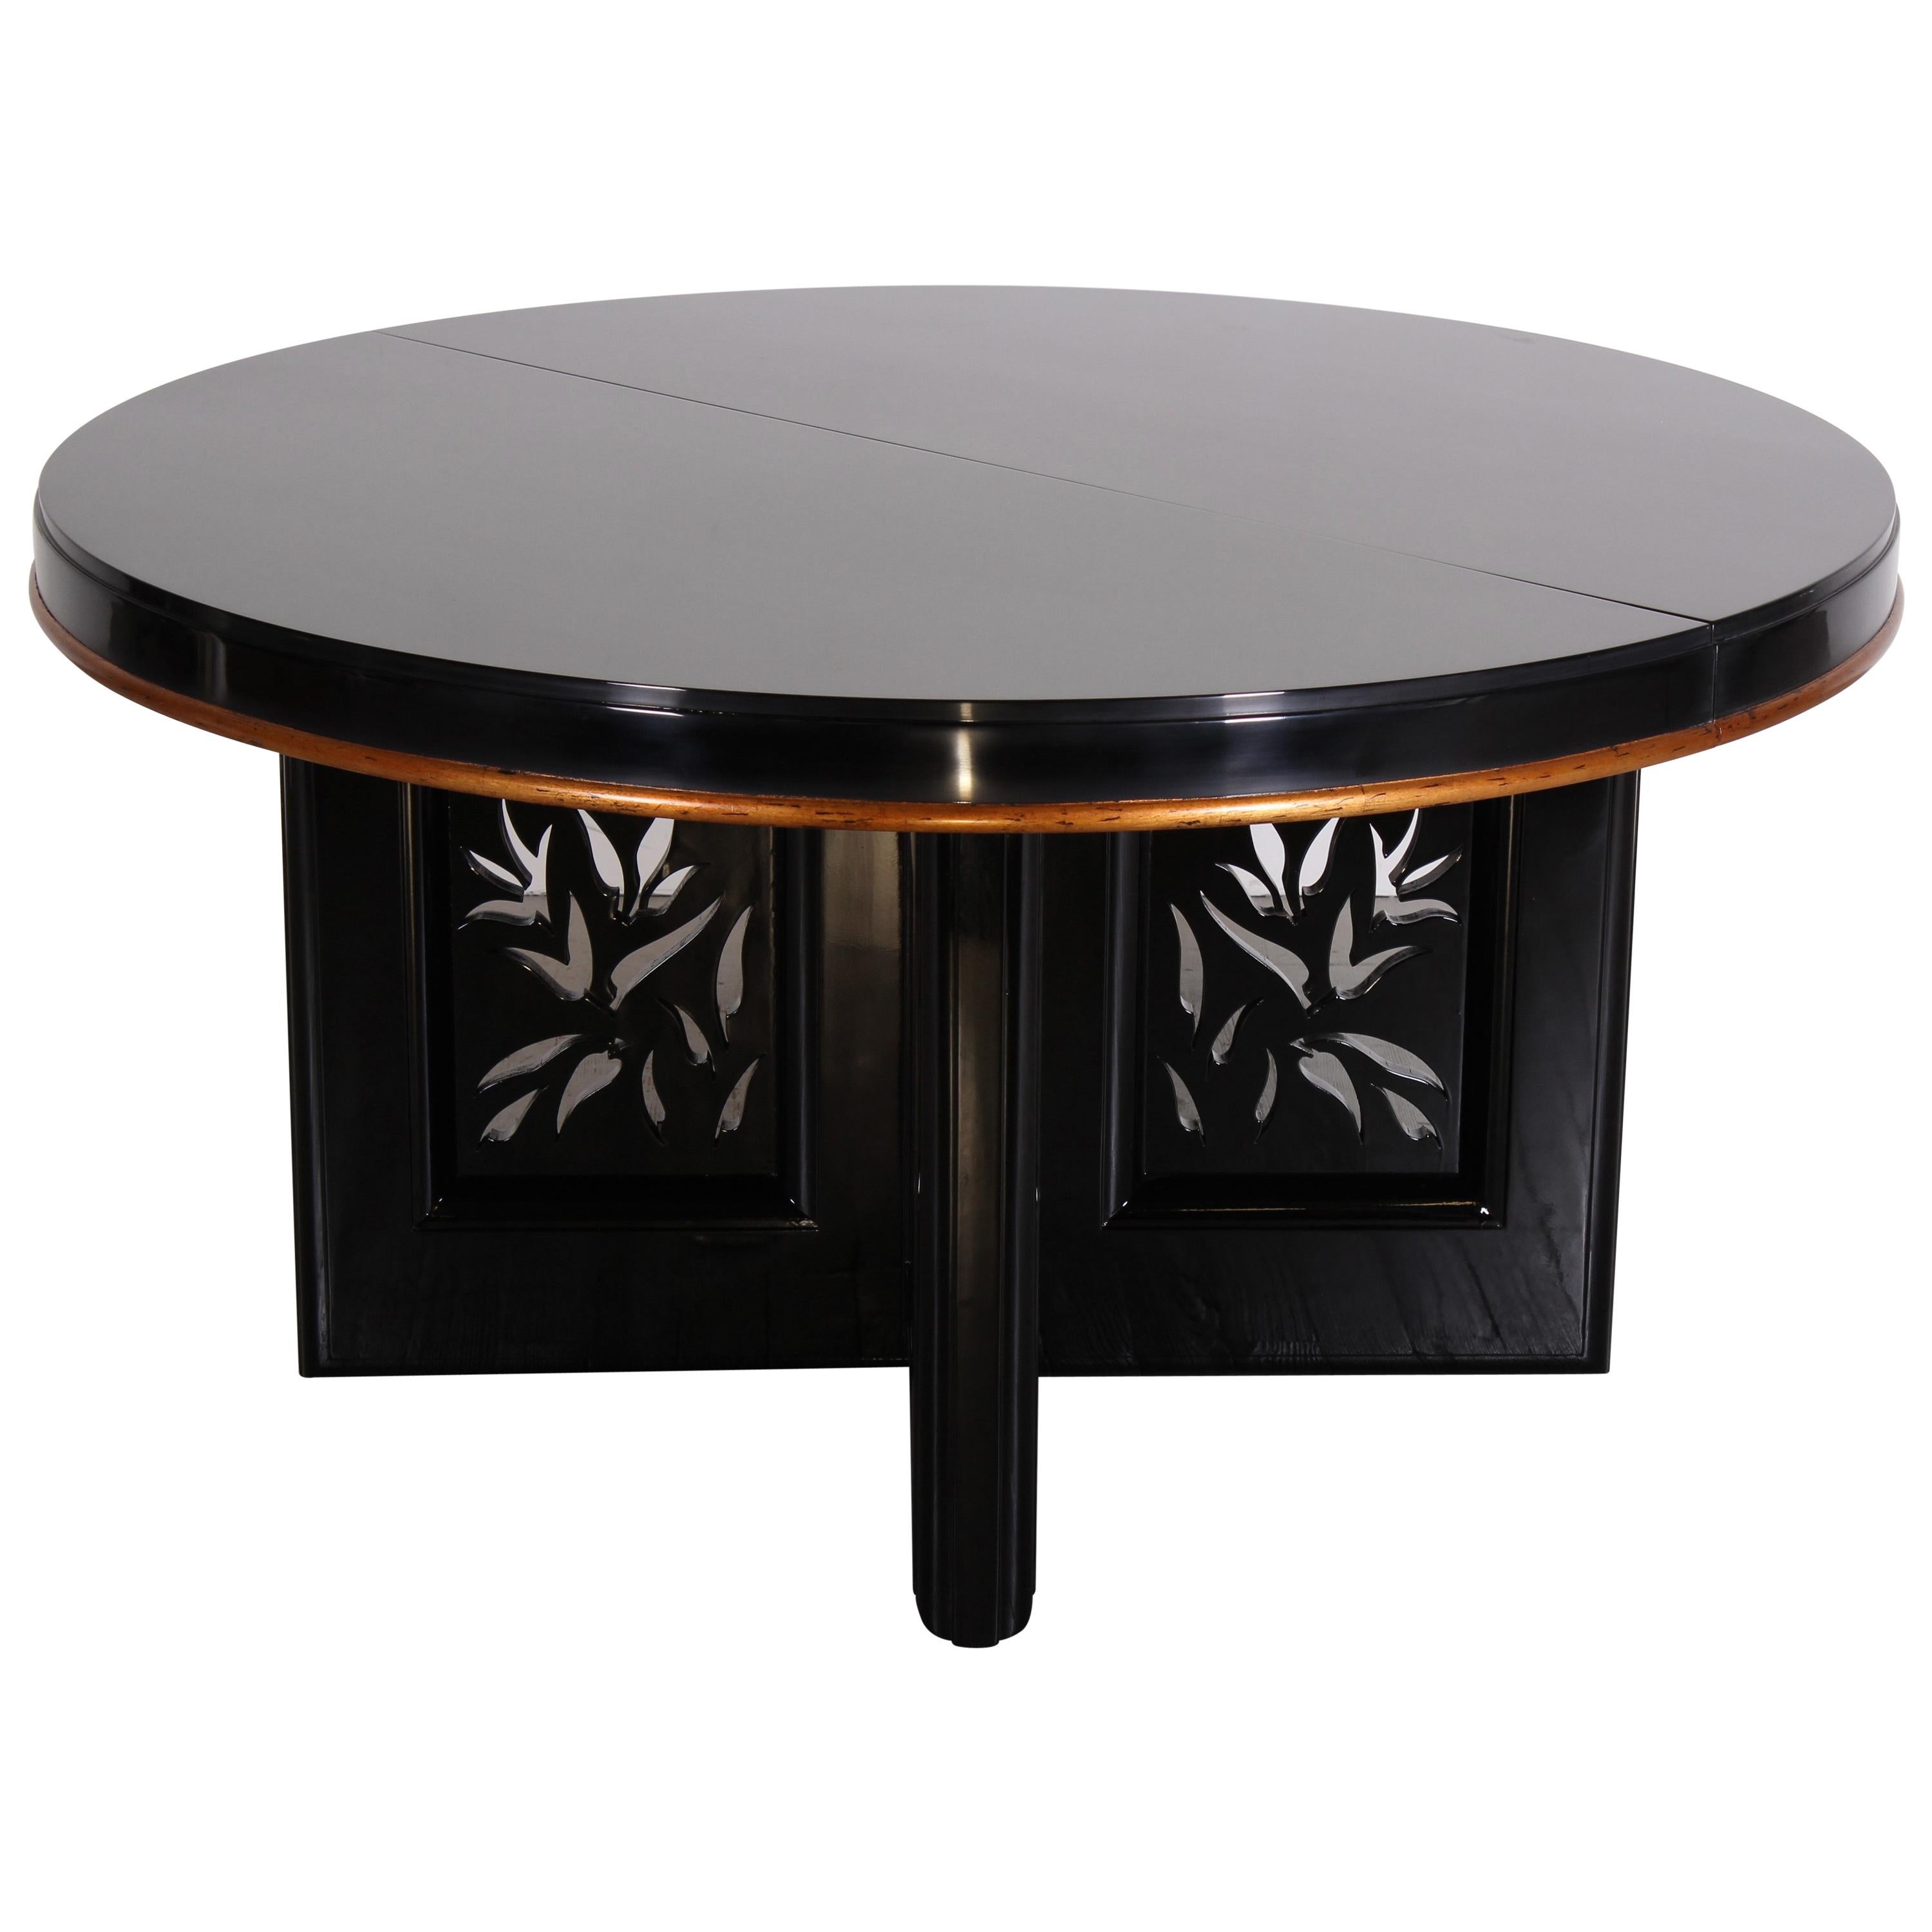 James Mont Asian Modern Dining Table, 1940s